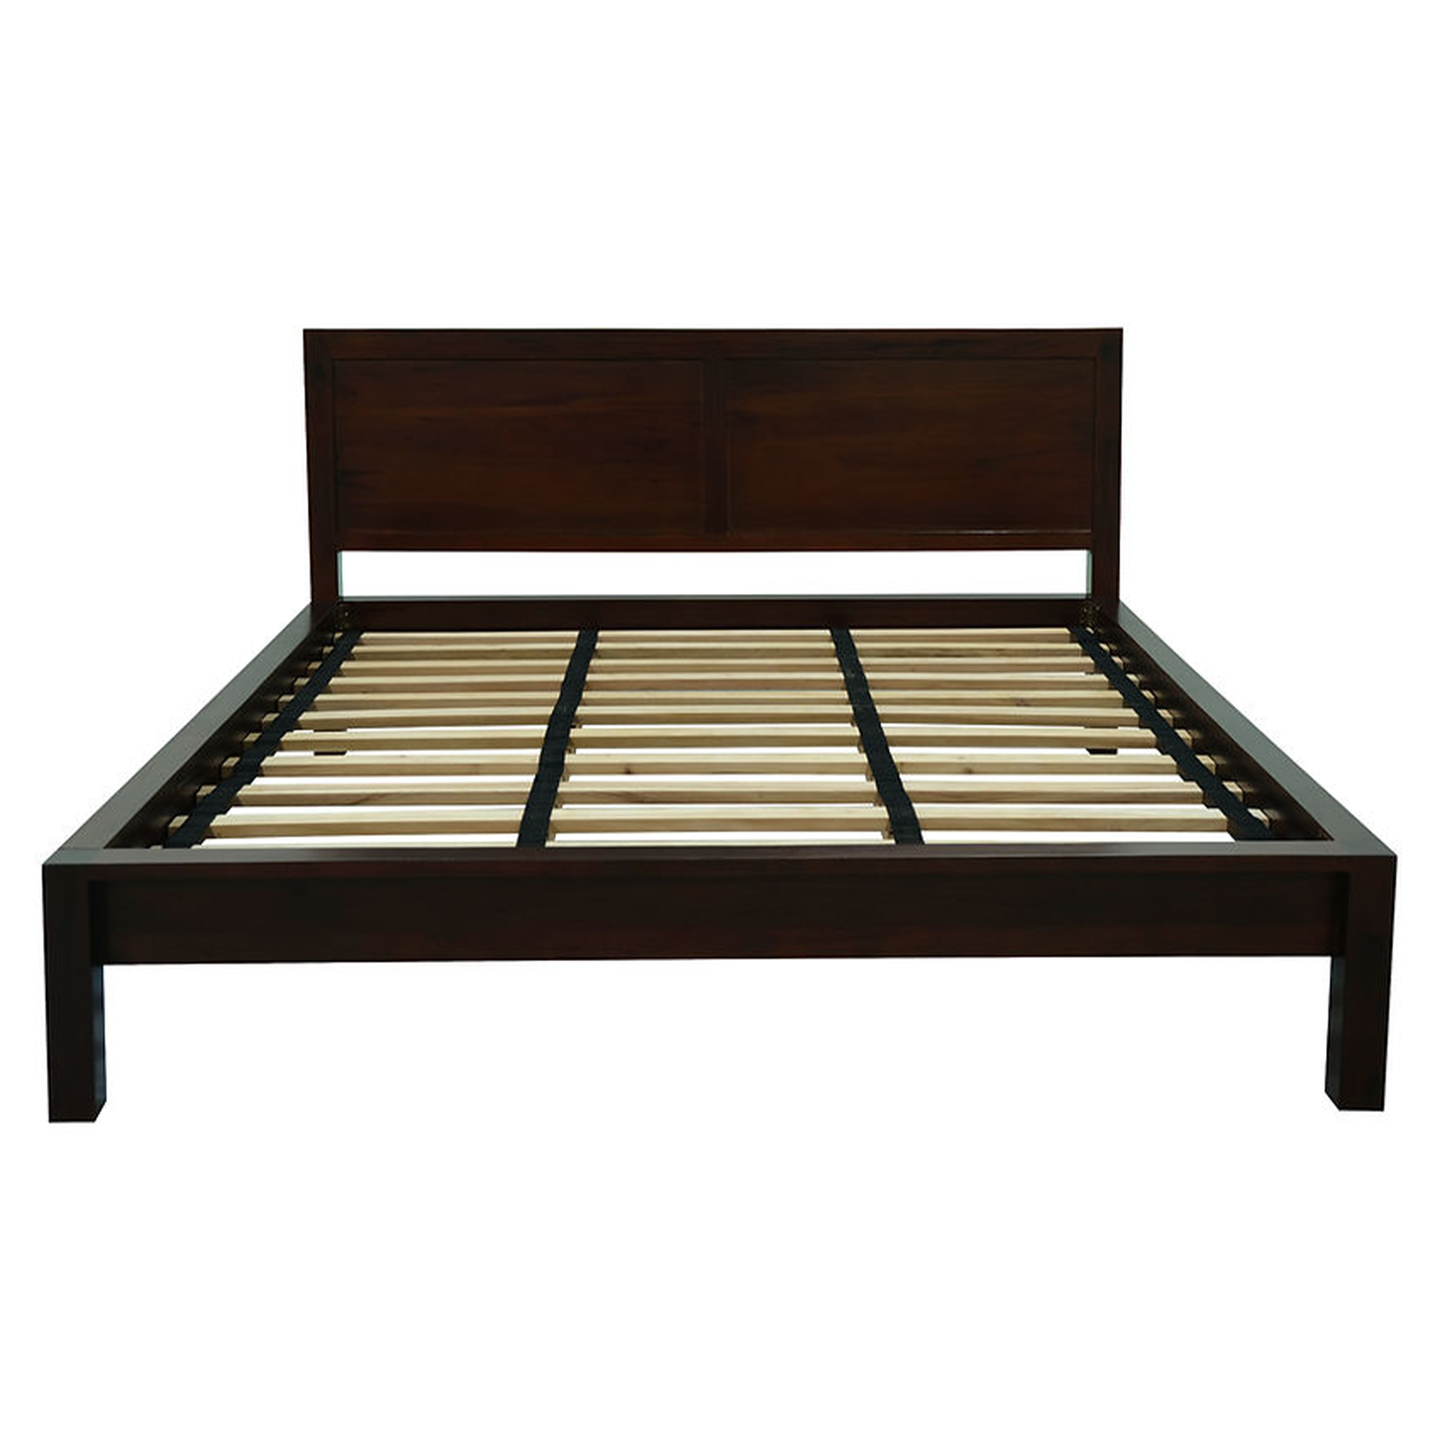 Amaro Solid Timber Queen Bed, Chocolate